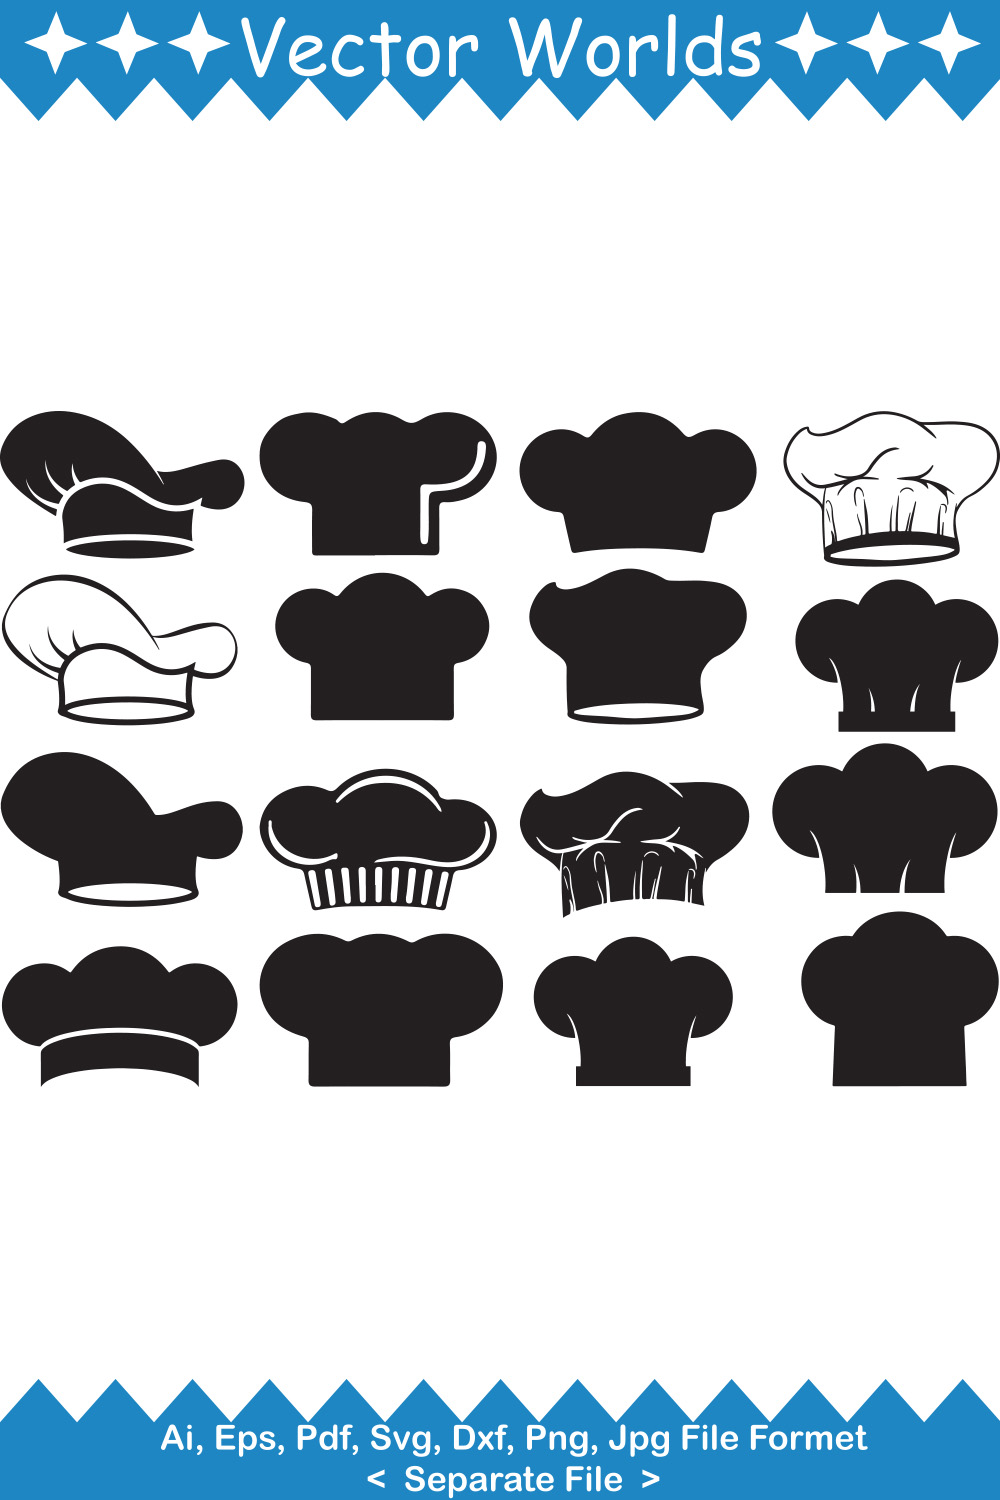 Set of charming vector image of chef's hats.